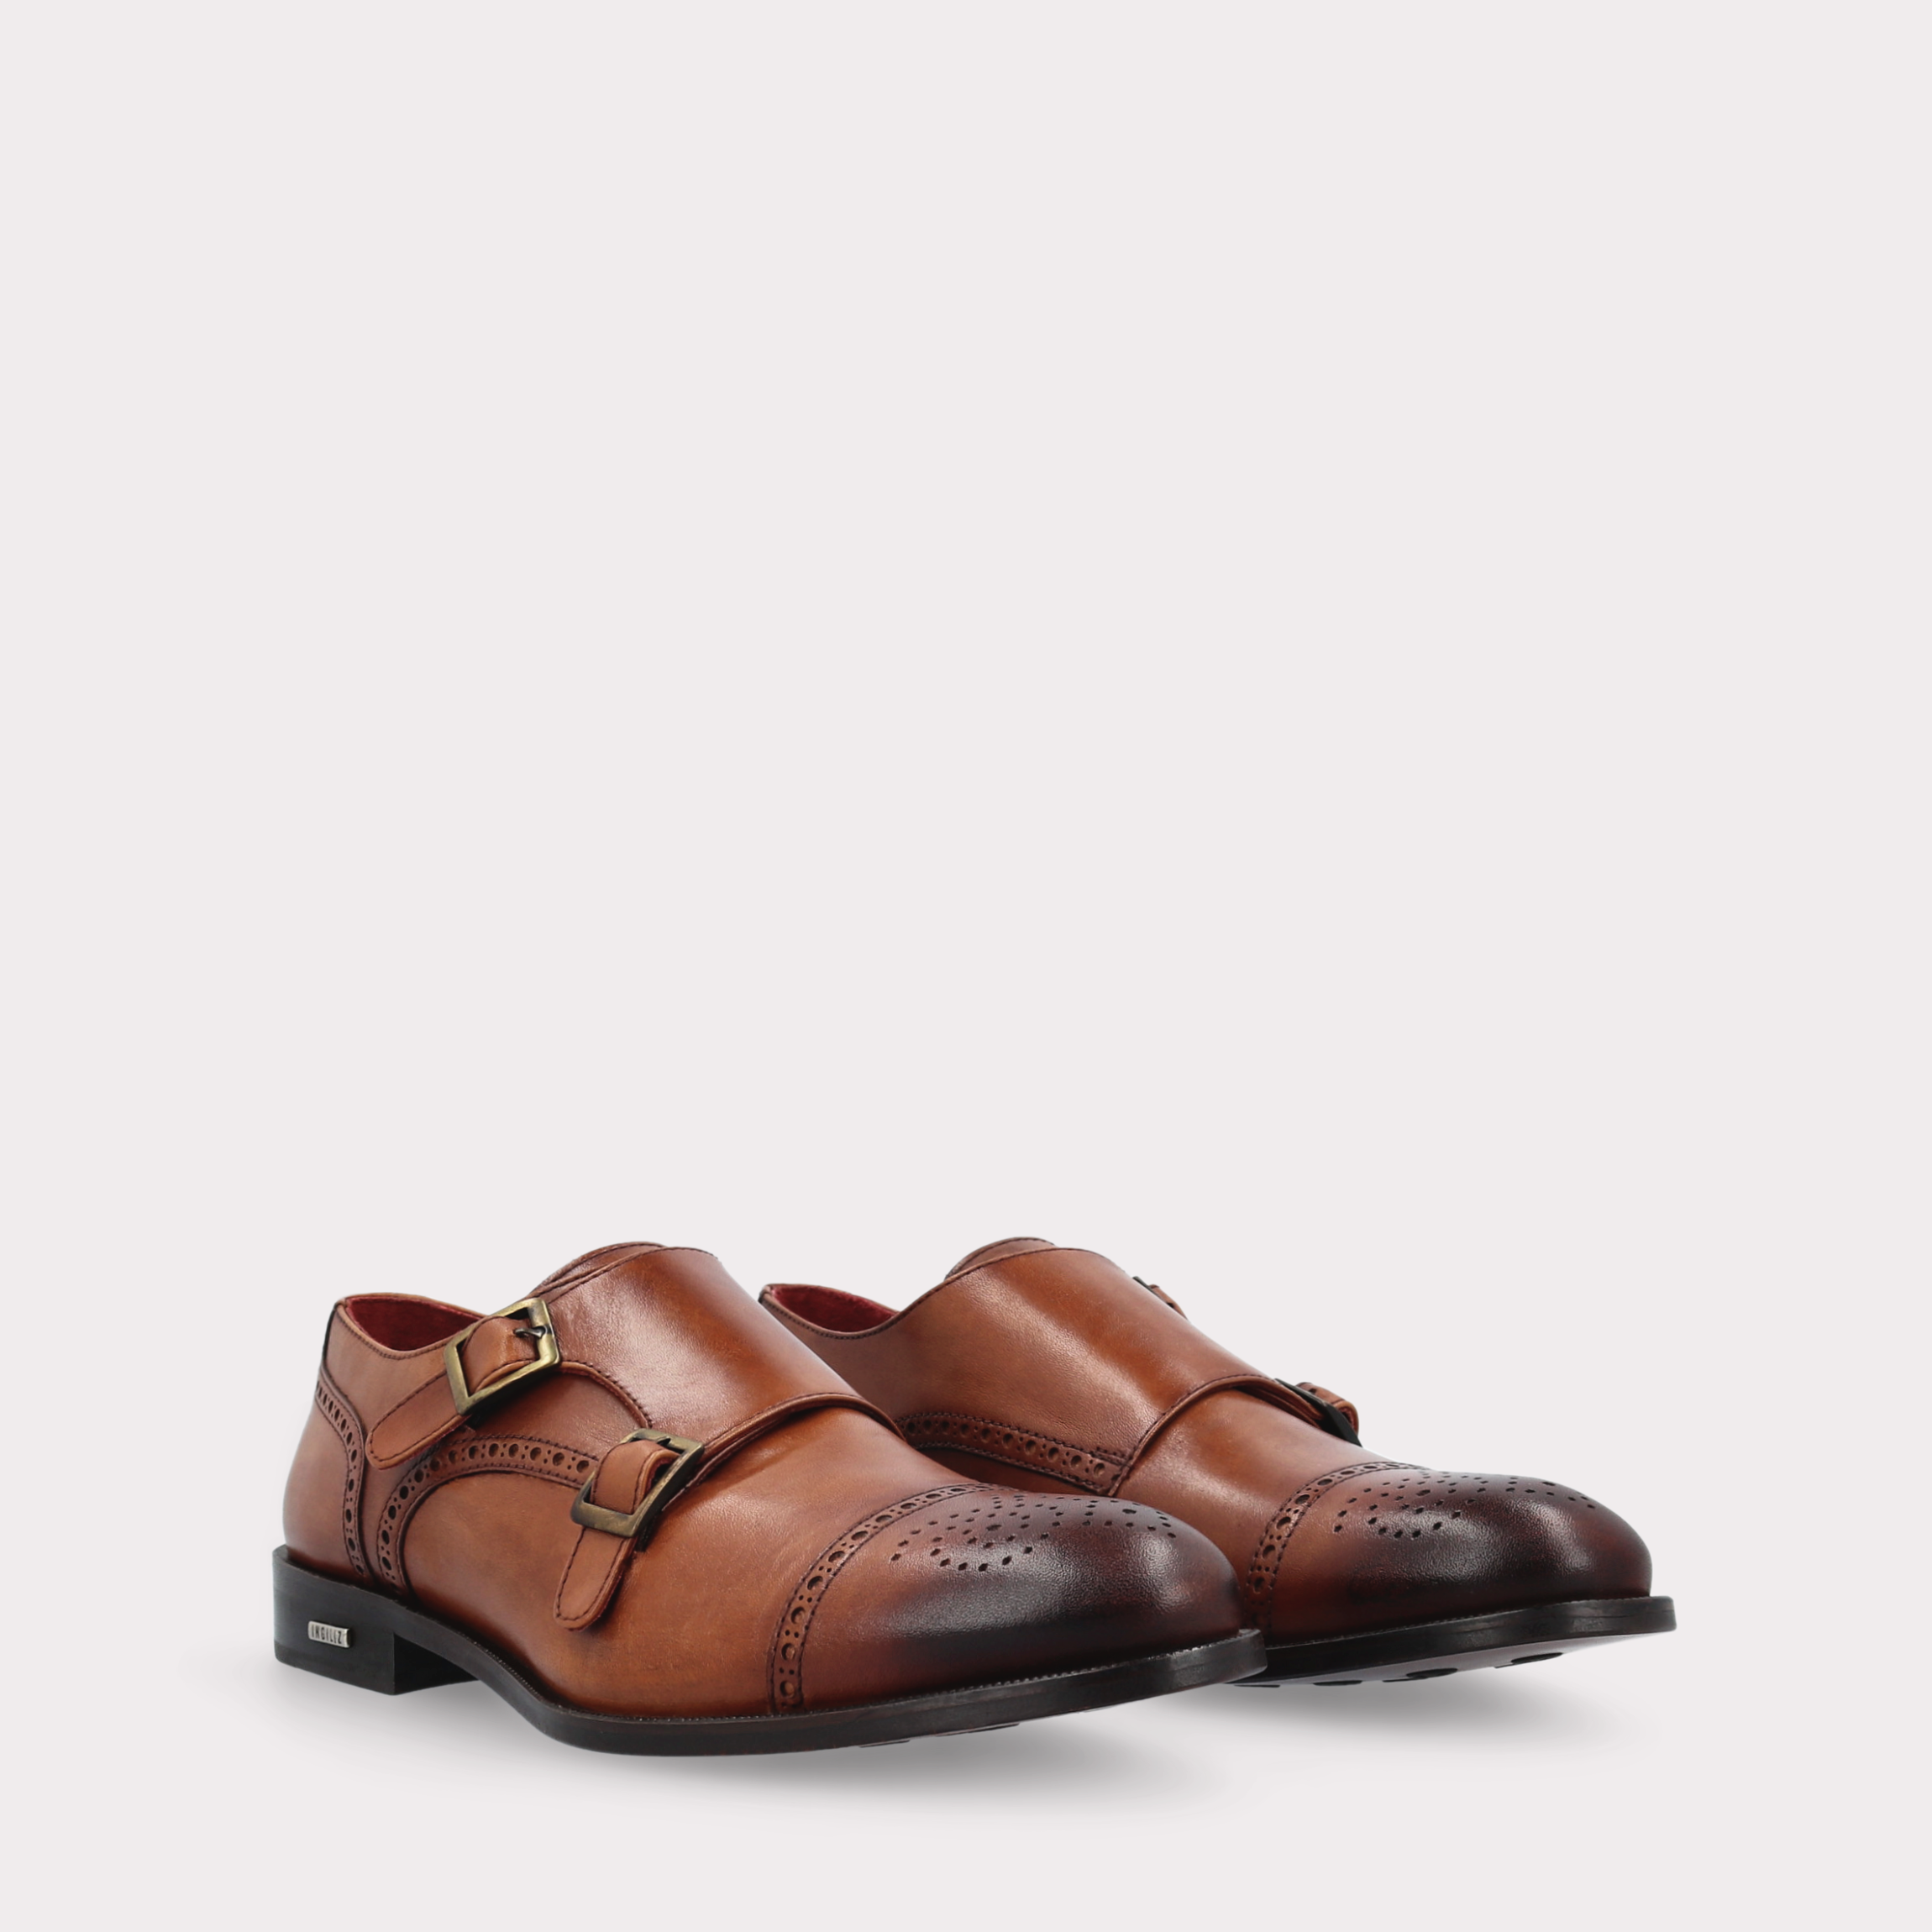 TRENTO 01 brown leather monk strap shoes